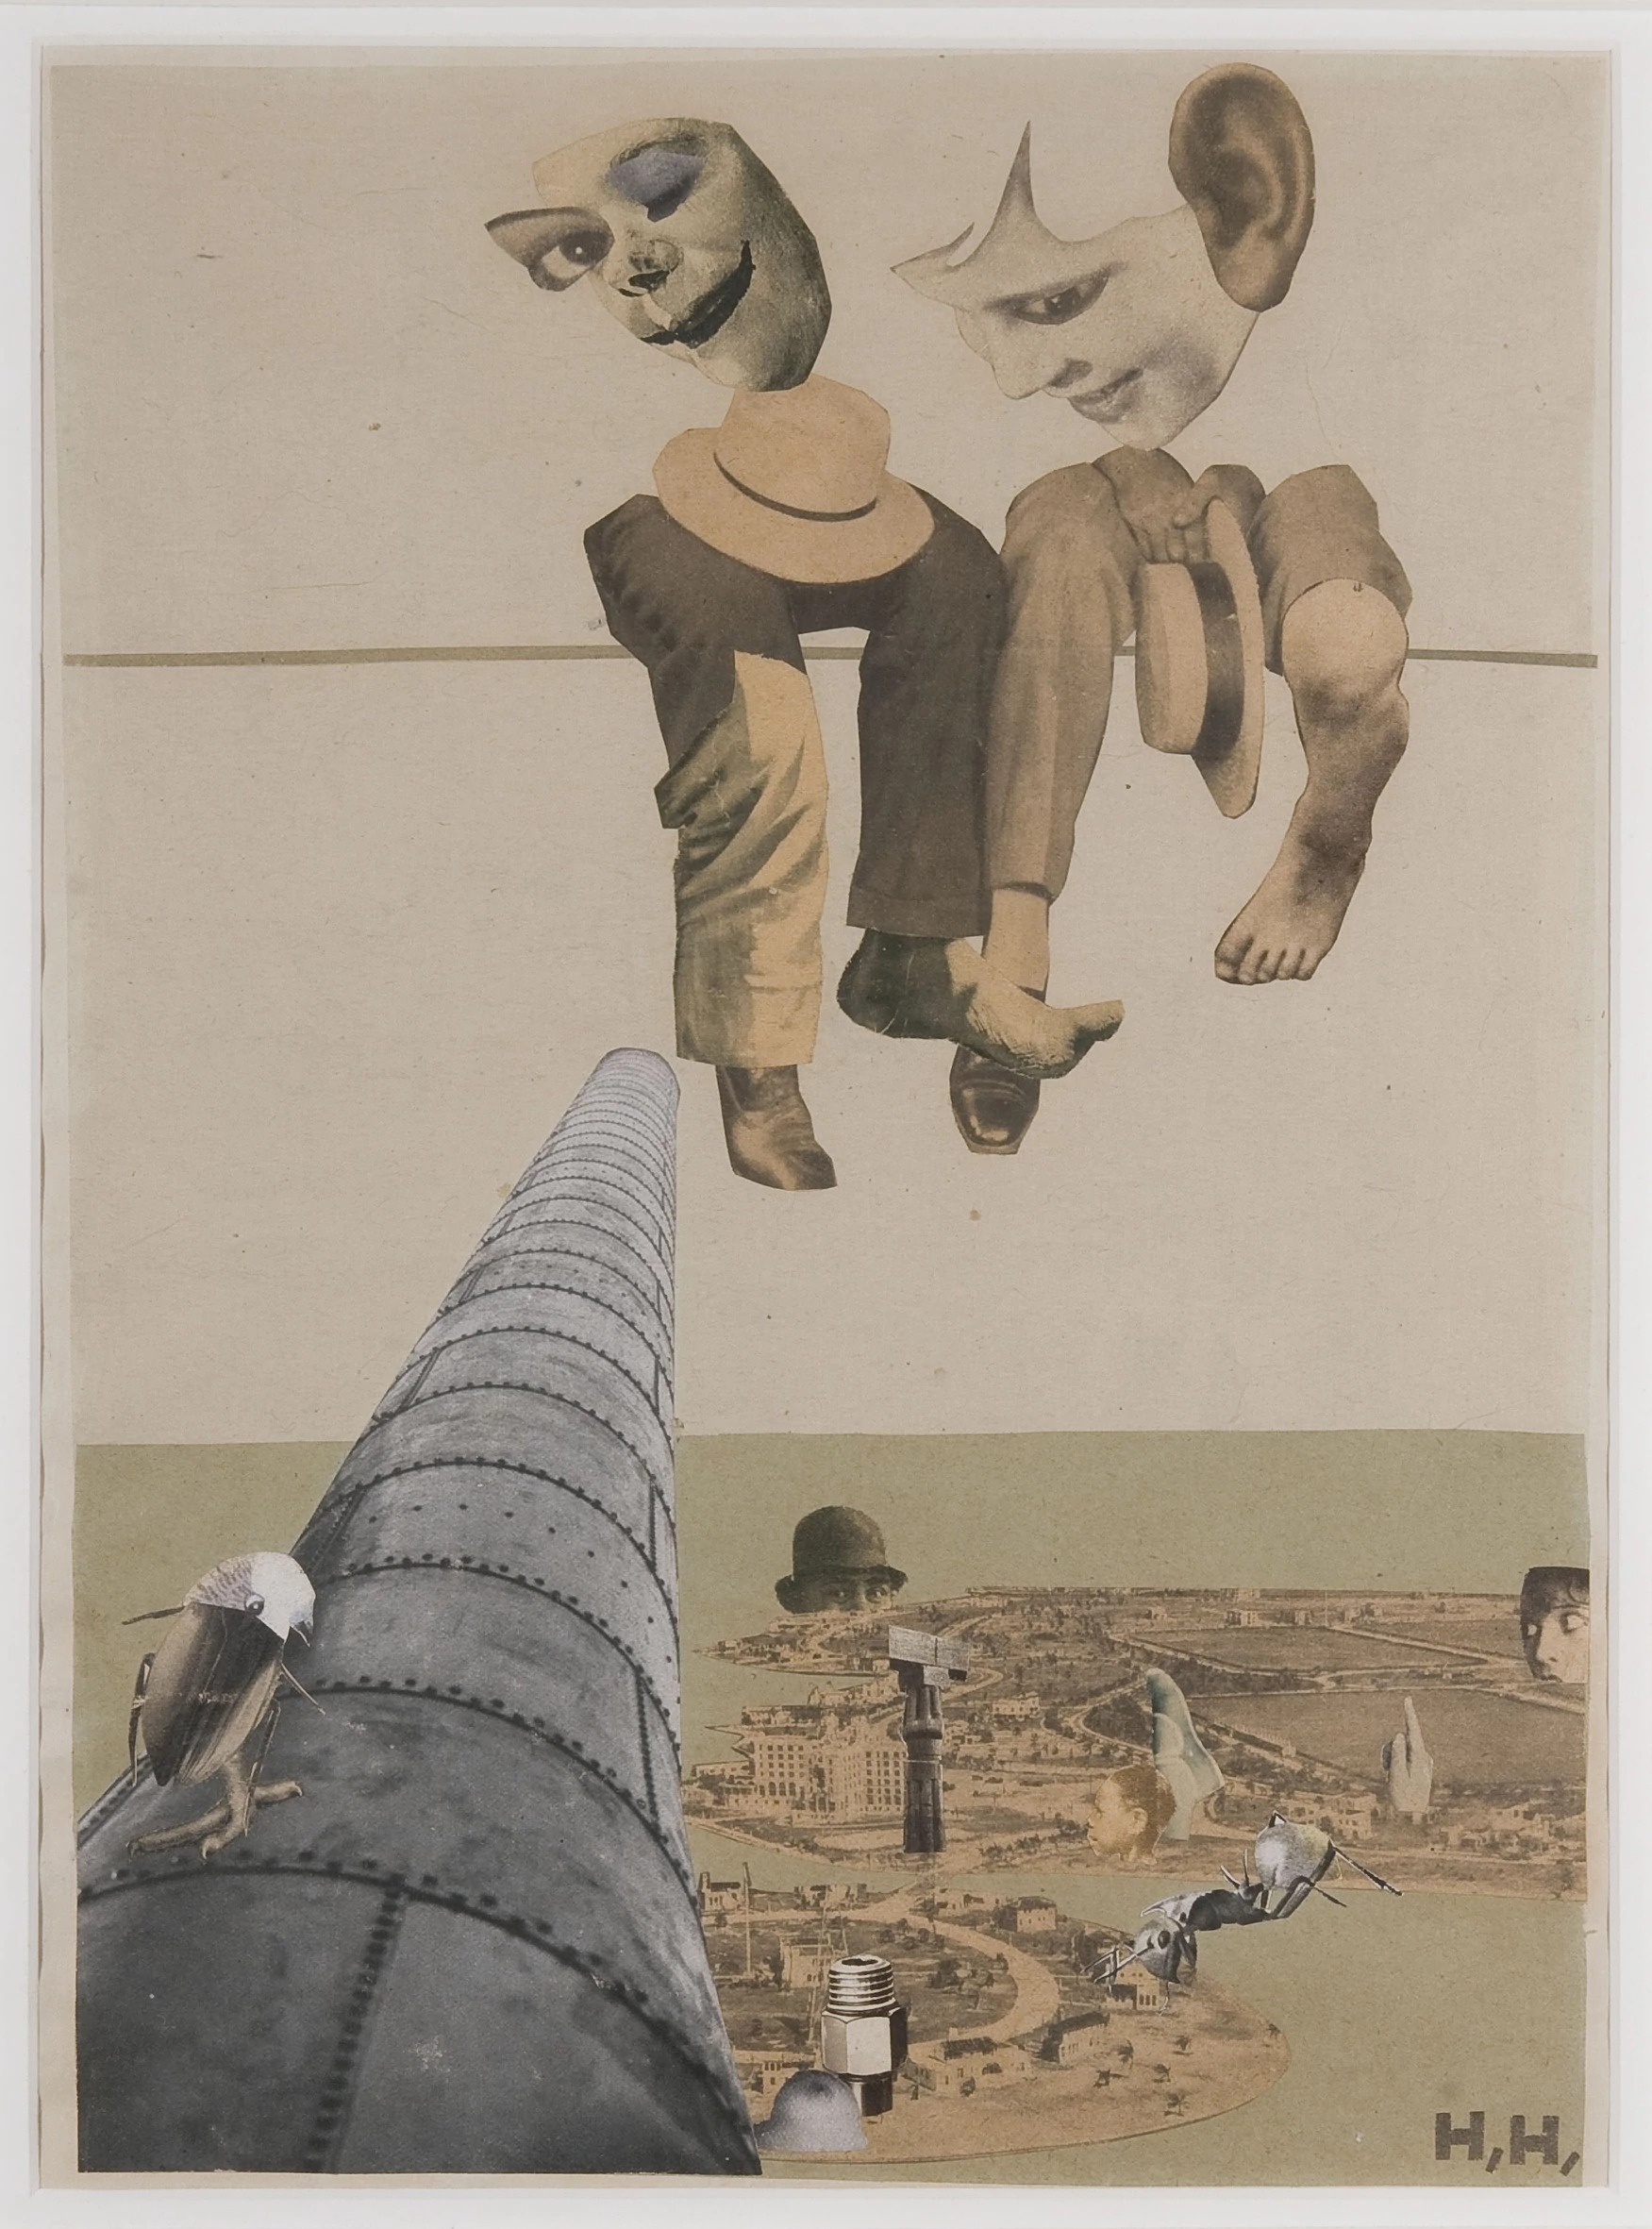 From Above, Hannah Höch